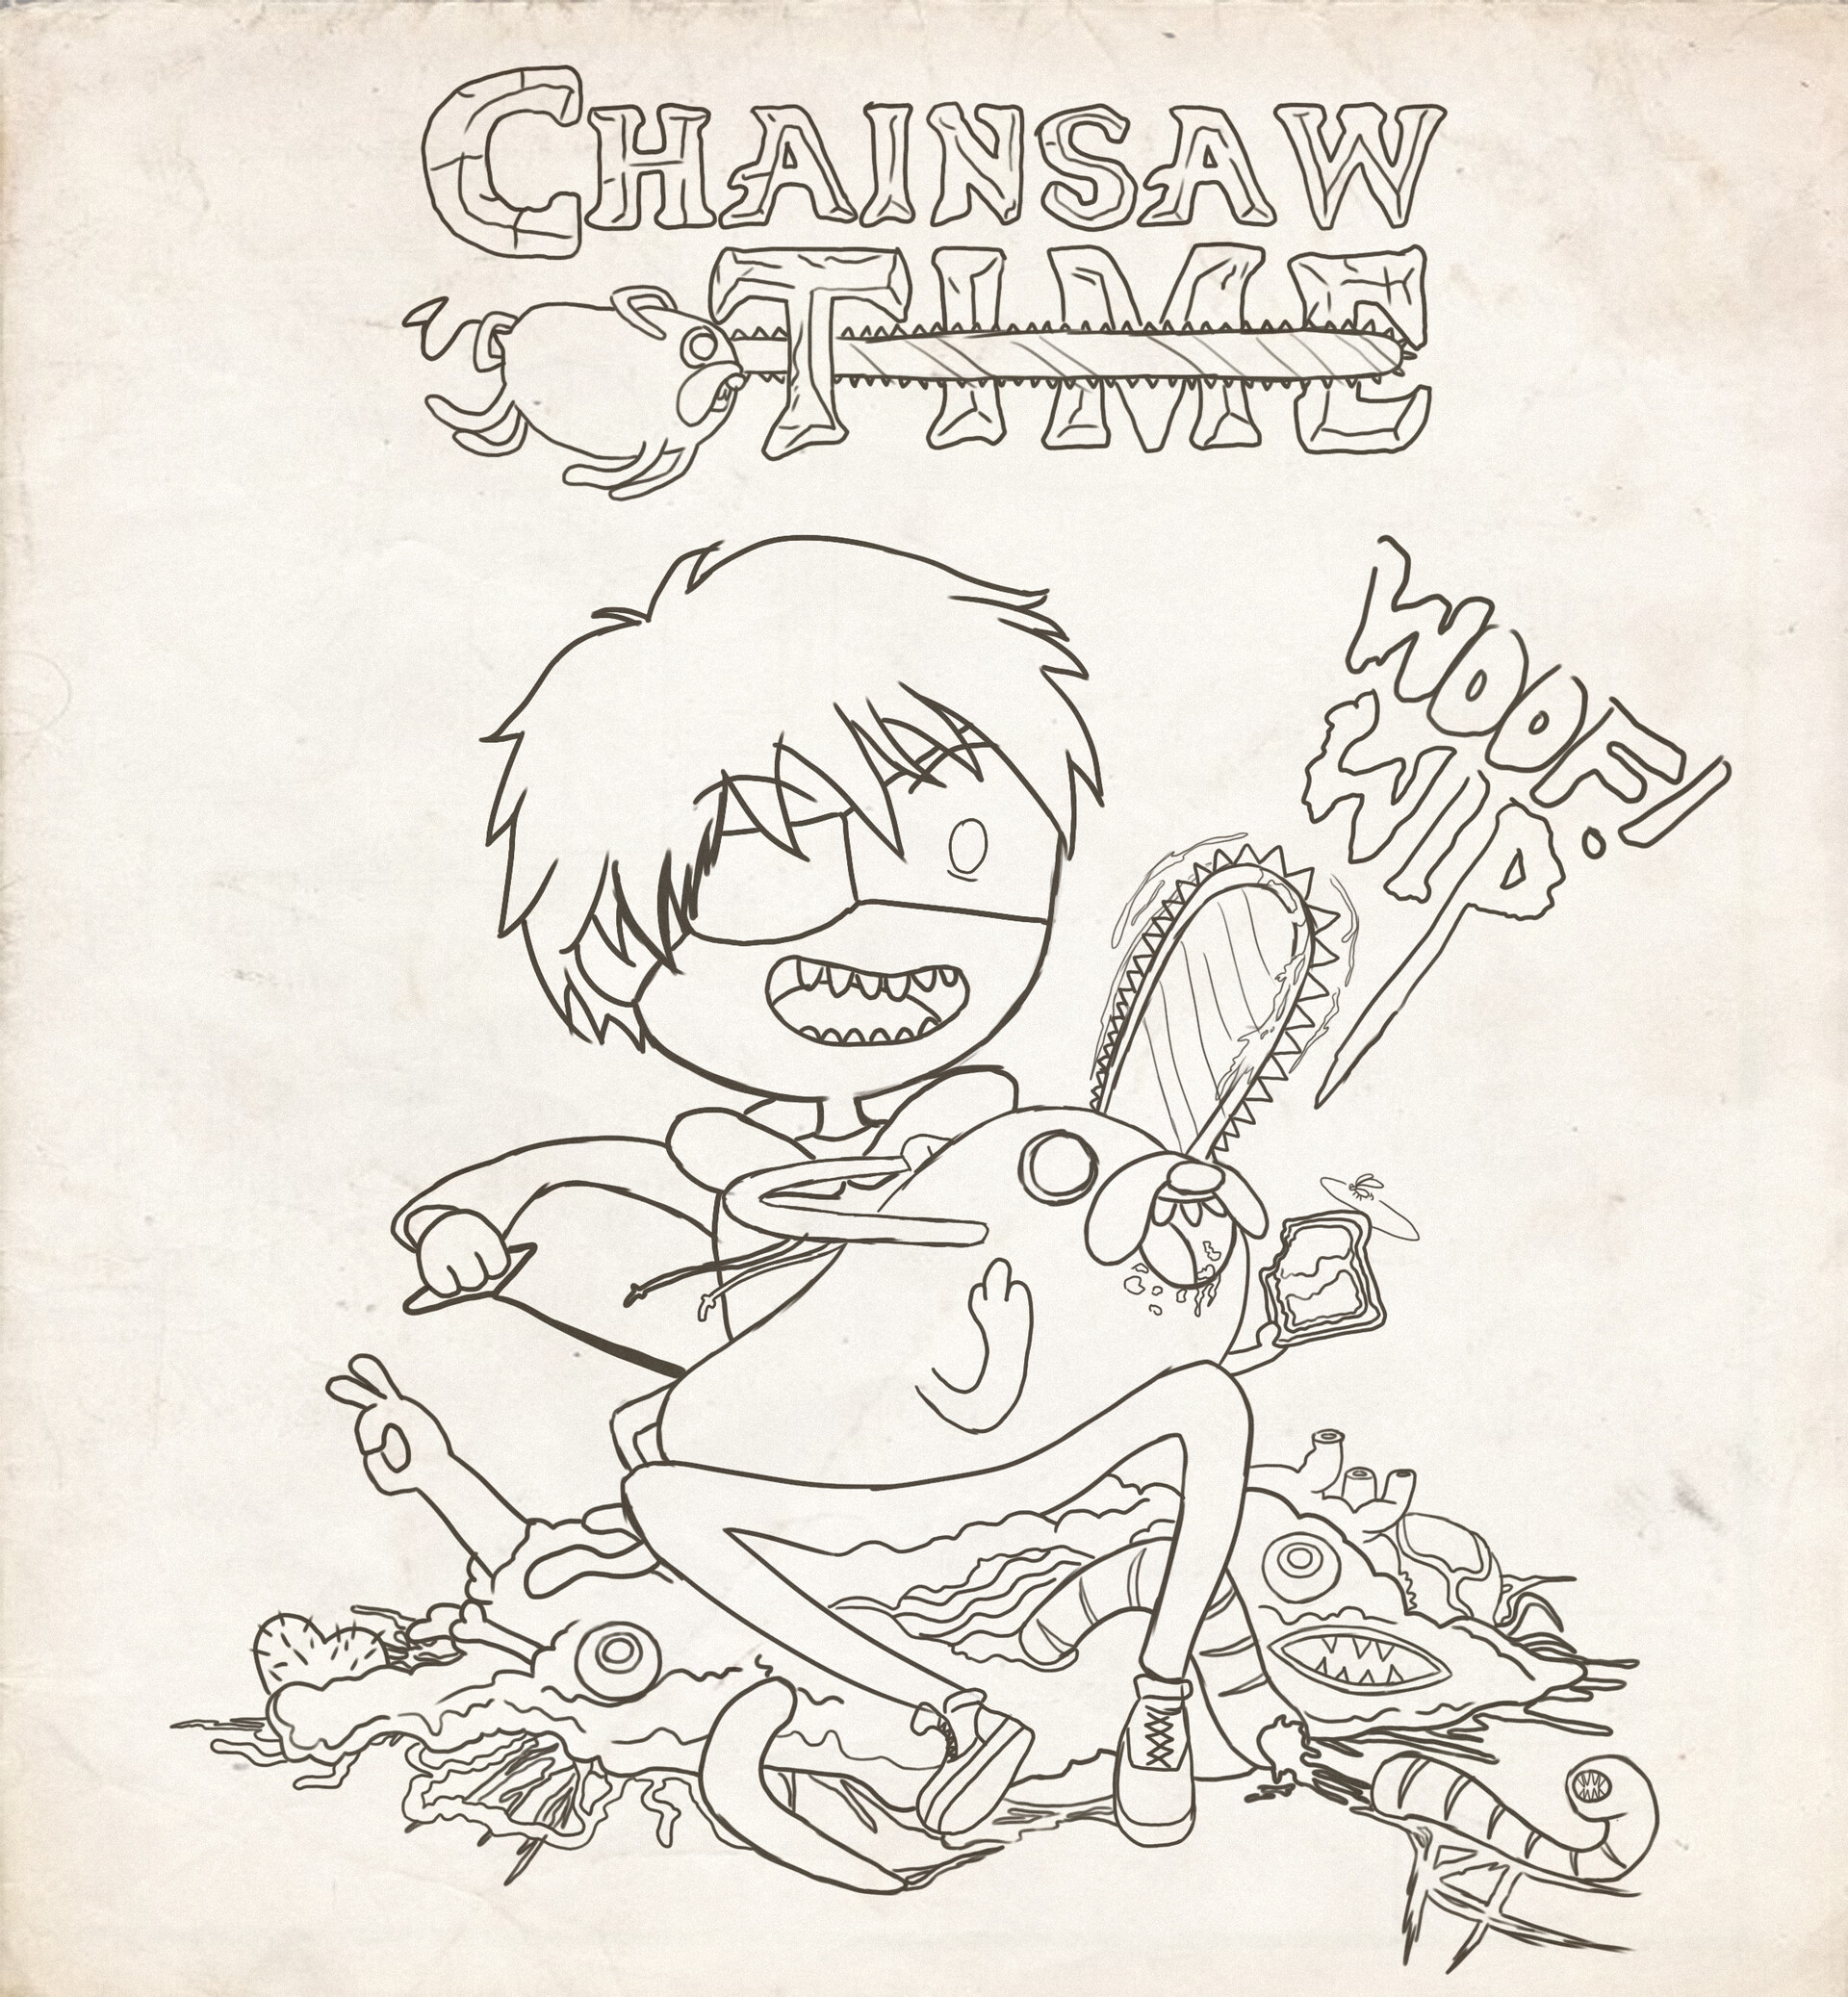 ArtStation - Chainsaw Time!!! Adventure Time x Chainsaw Man crossover